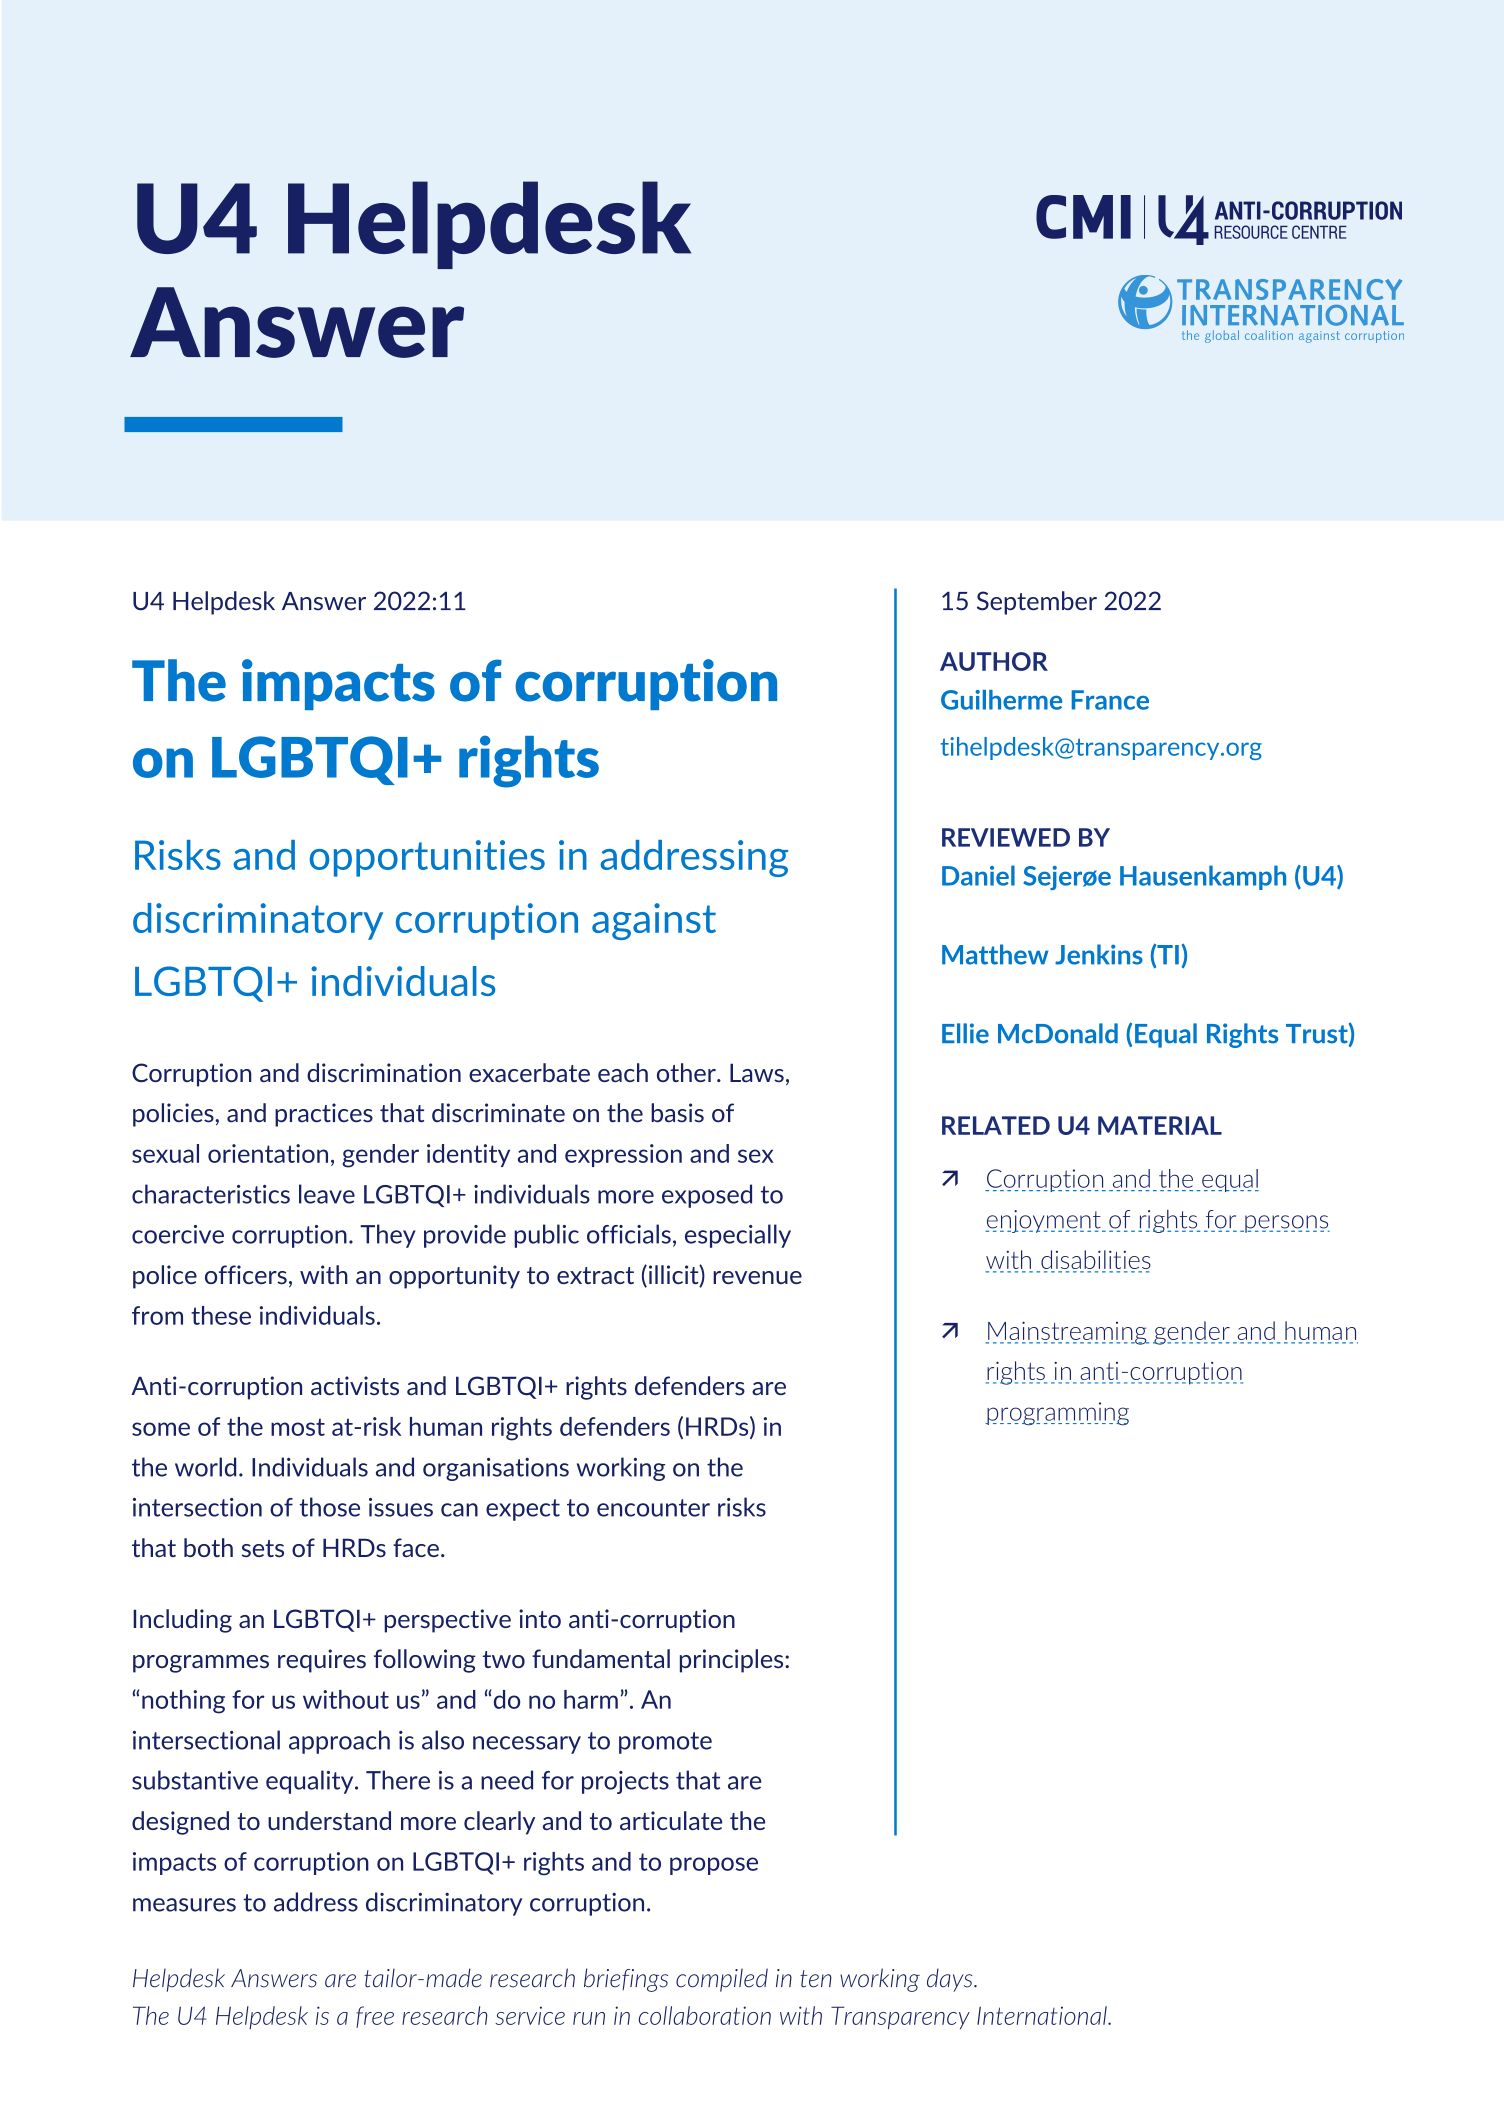 The impacts of corruption on LGBTQI+ rights